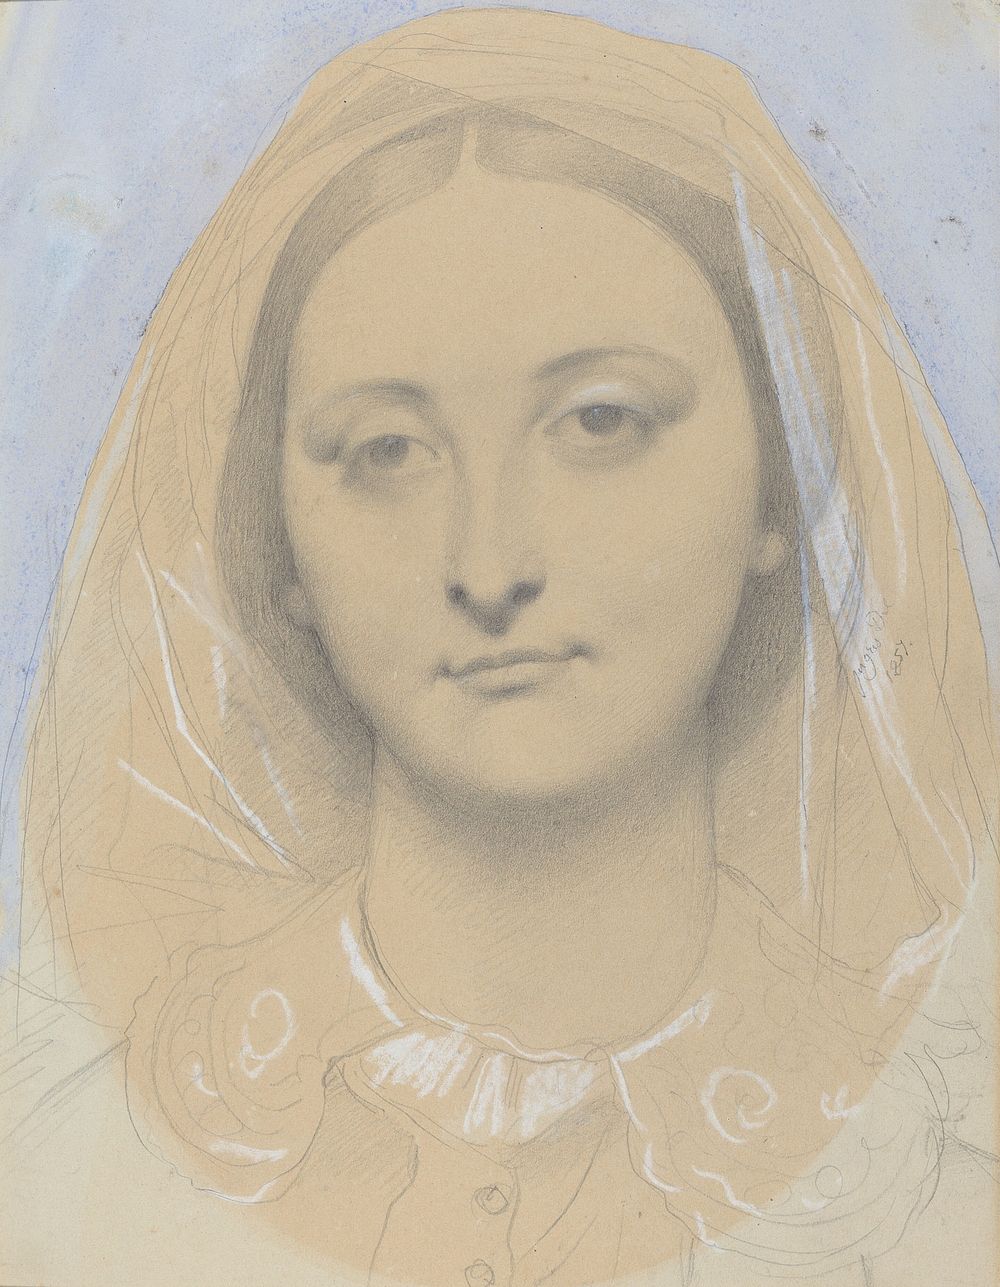 Mademoiselle Mary de Borderieux (1857) drawing in high resolution by Jean Auguste Dominique Ingres.  